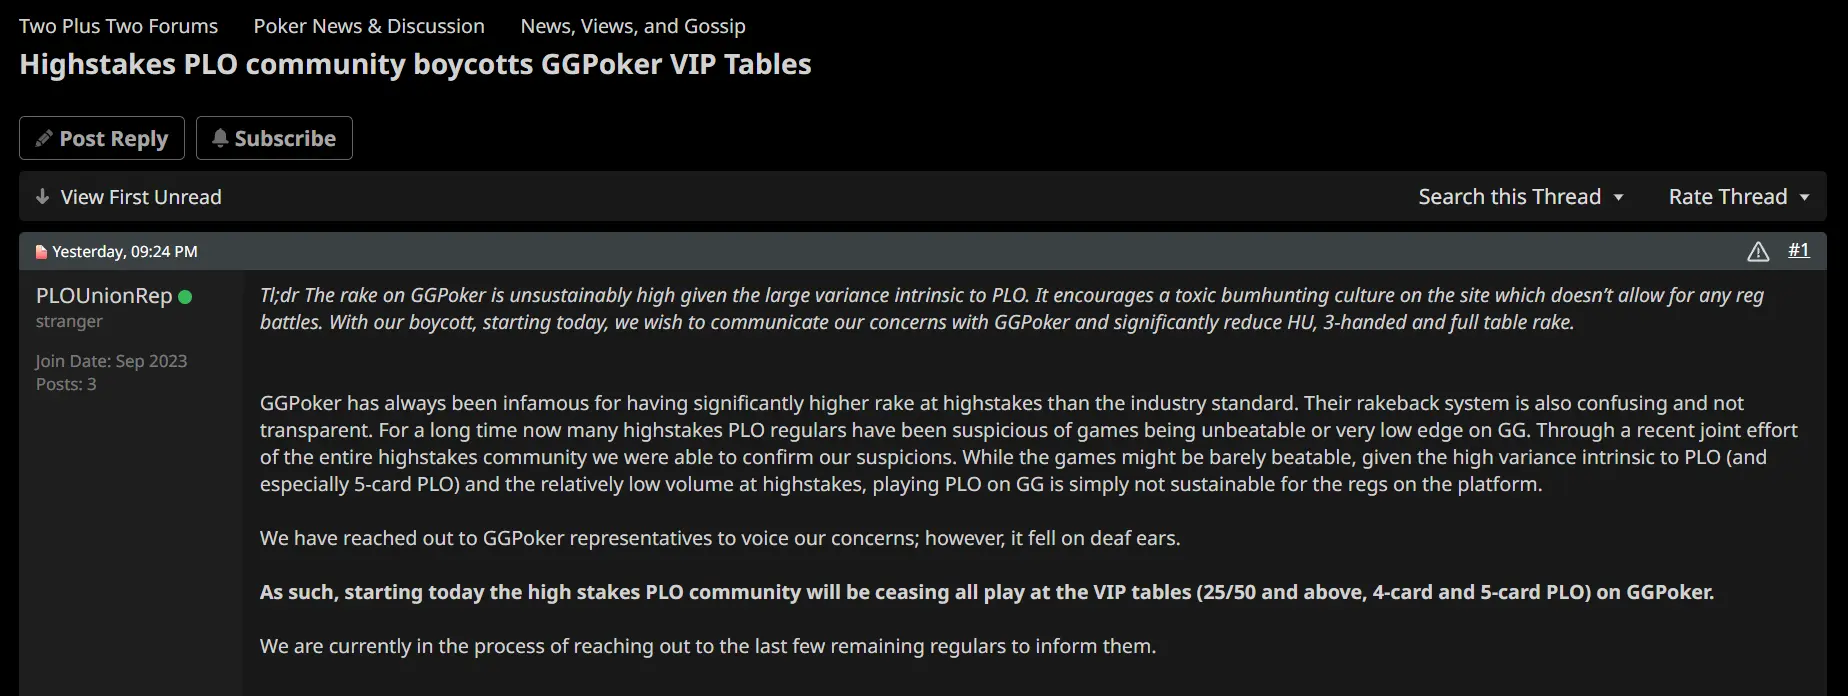 Image of the TwoPlusTwo thread of PLO players beginning to boycott GGPoker.